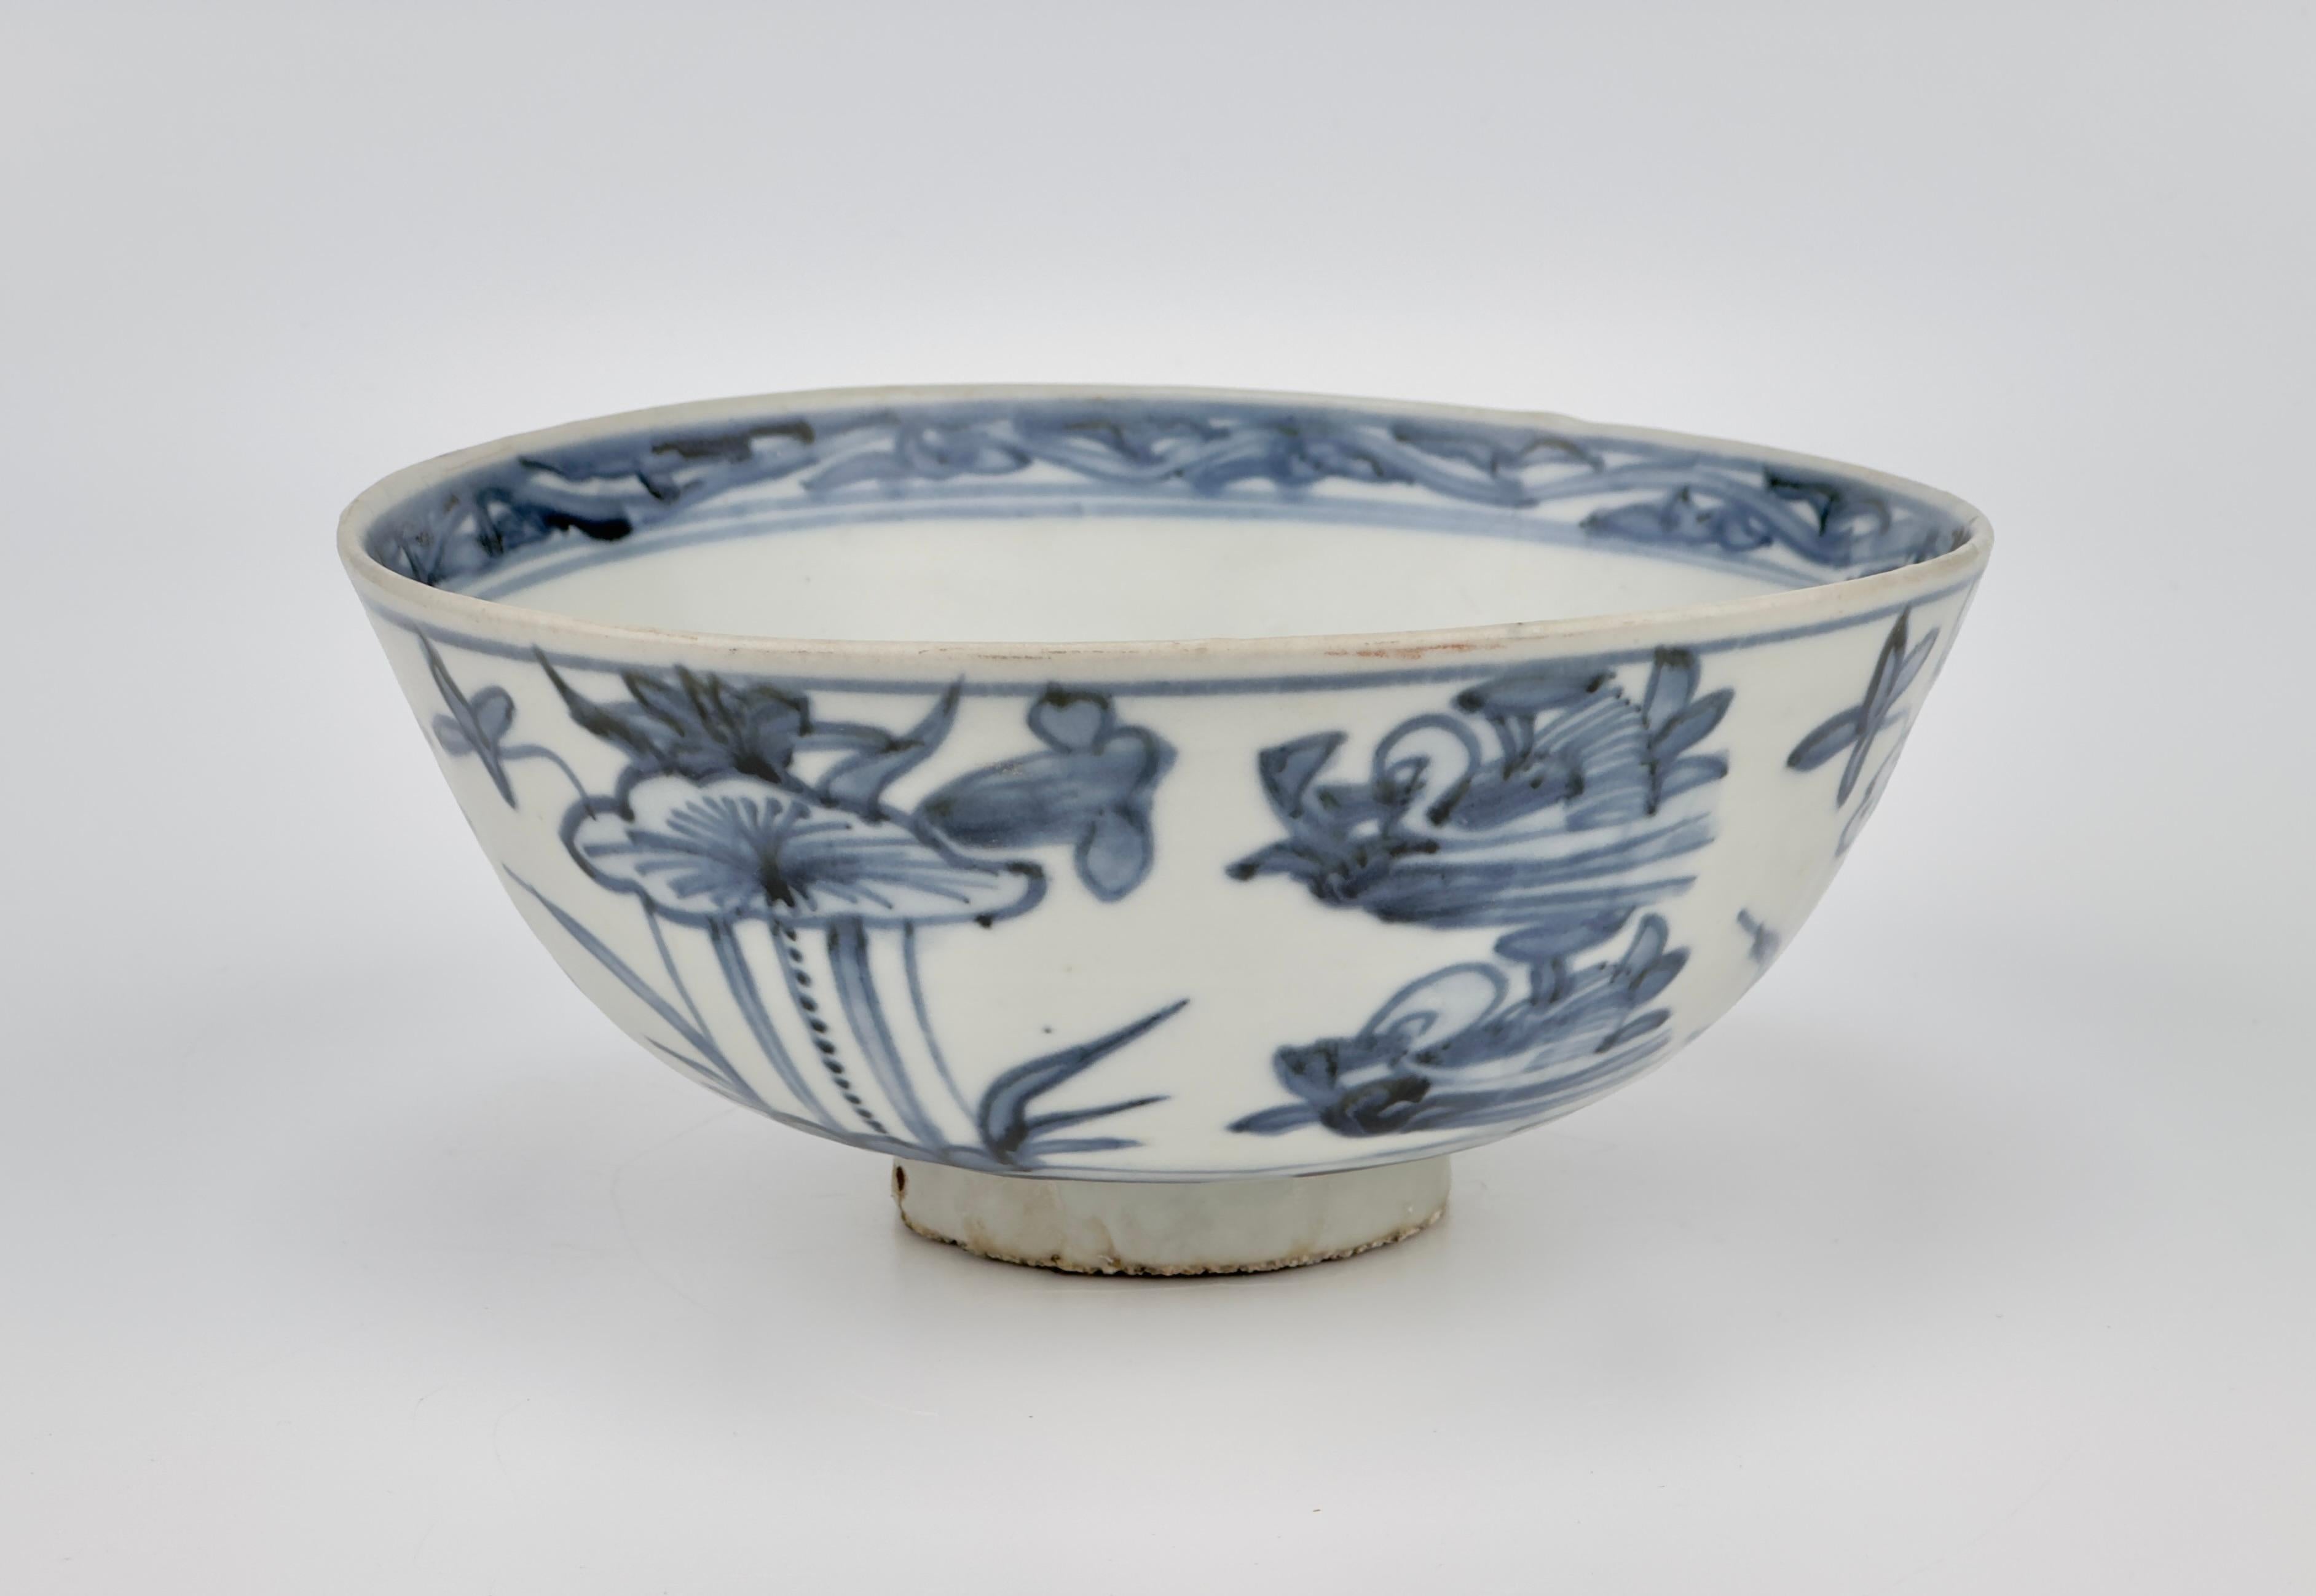 Chinese Bowl with mandarin duck and lotus pattern design, Late Ming Era(16-17th century) For Sale